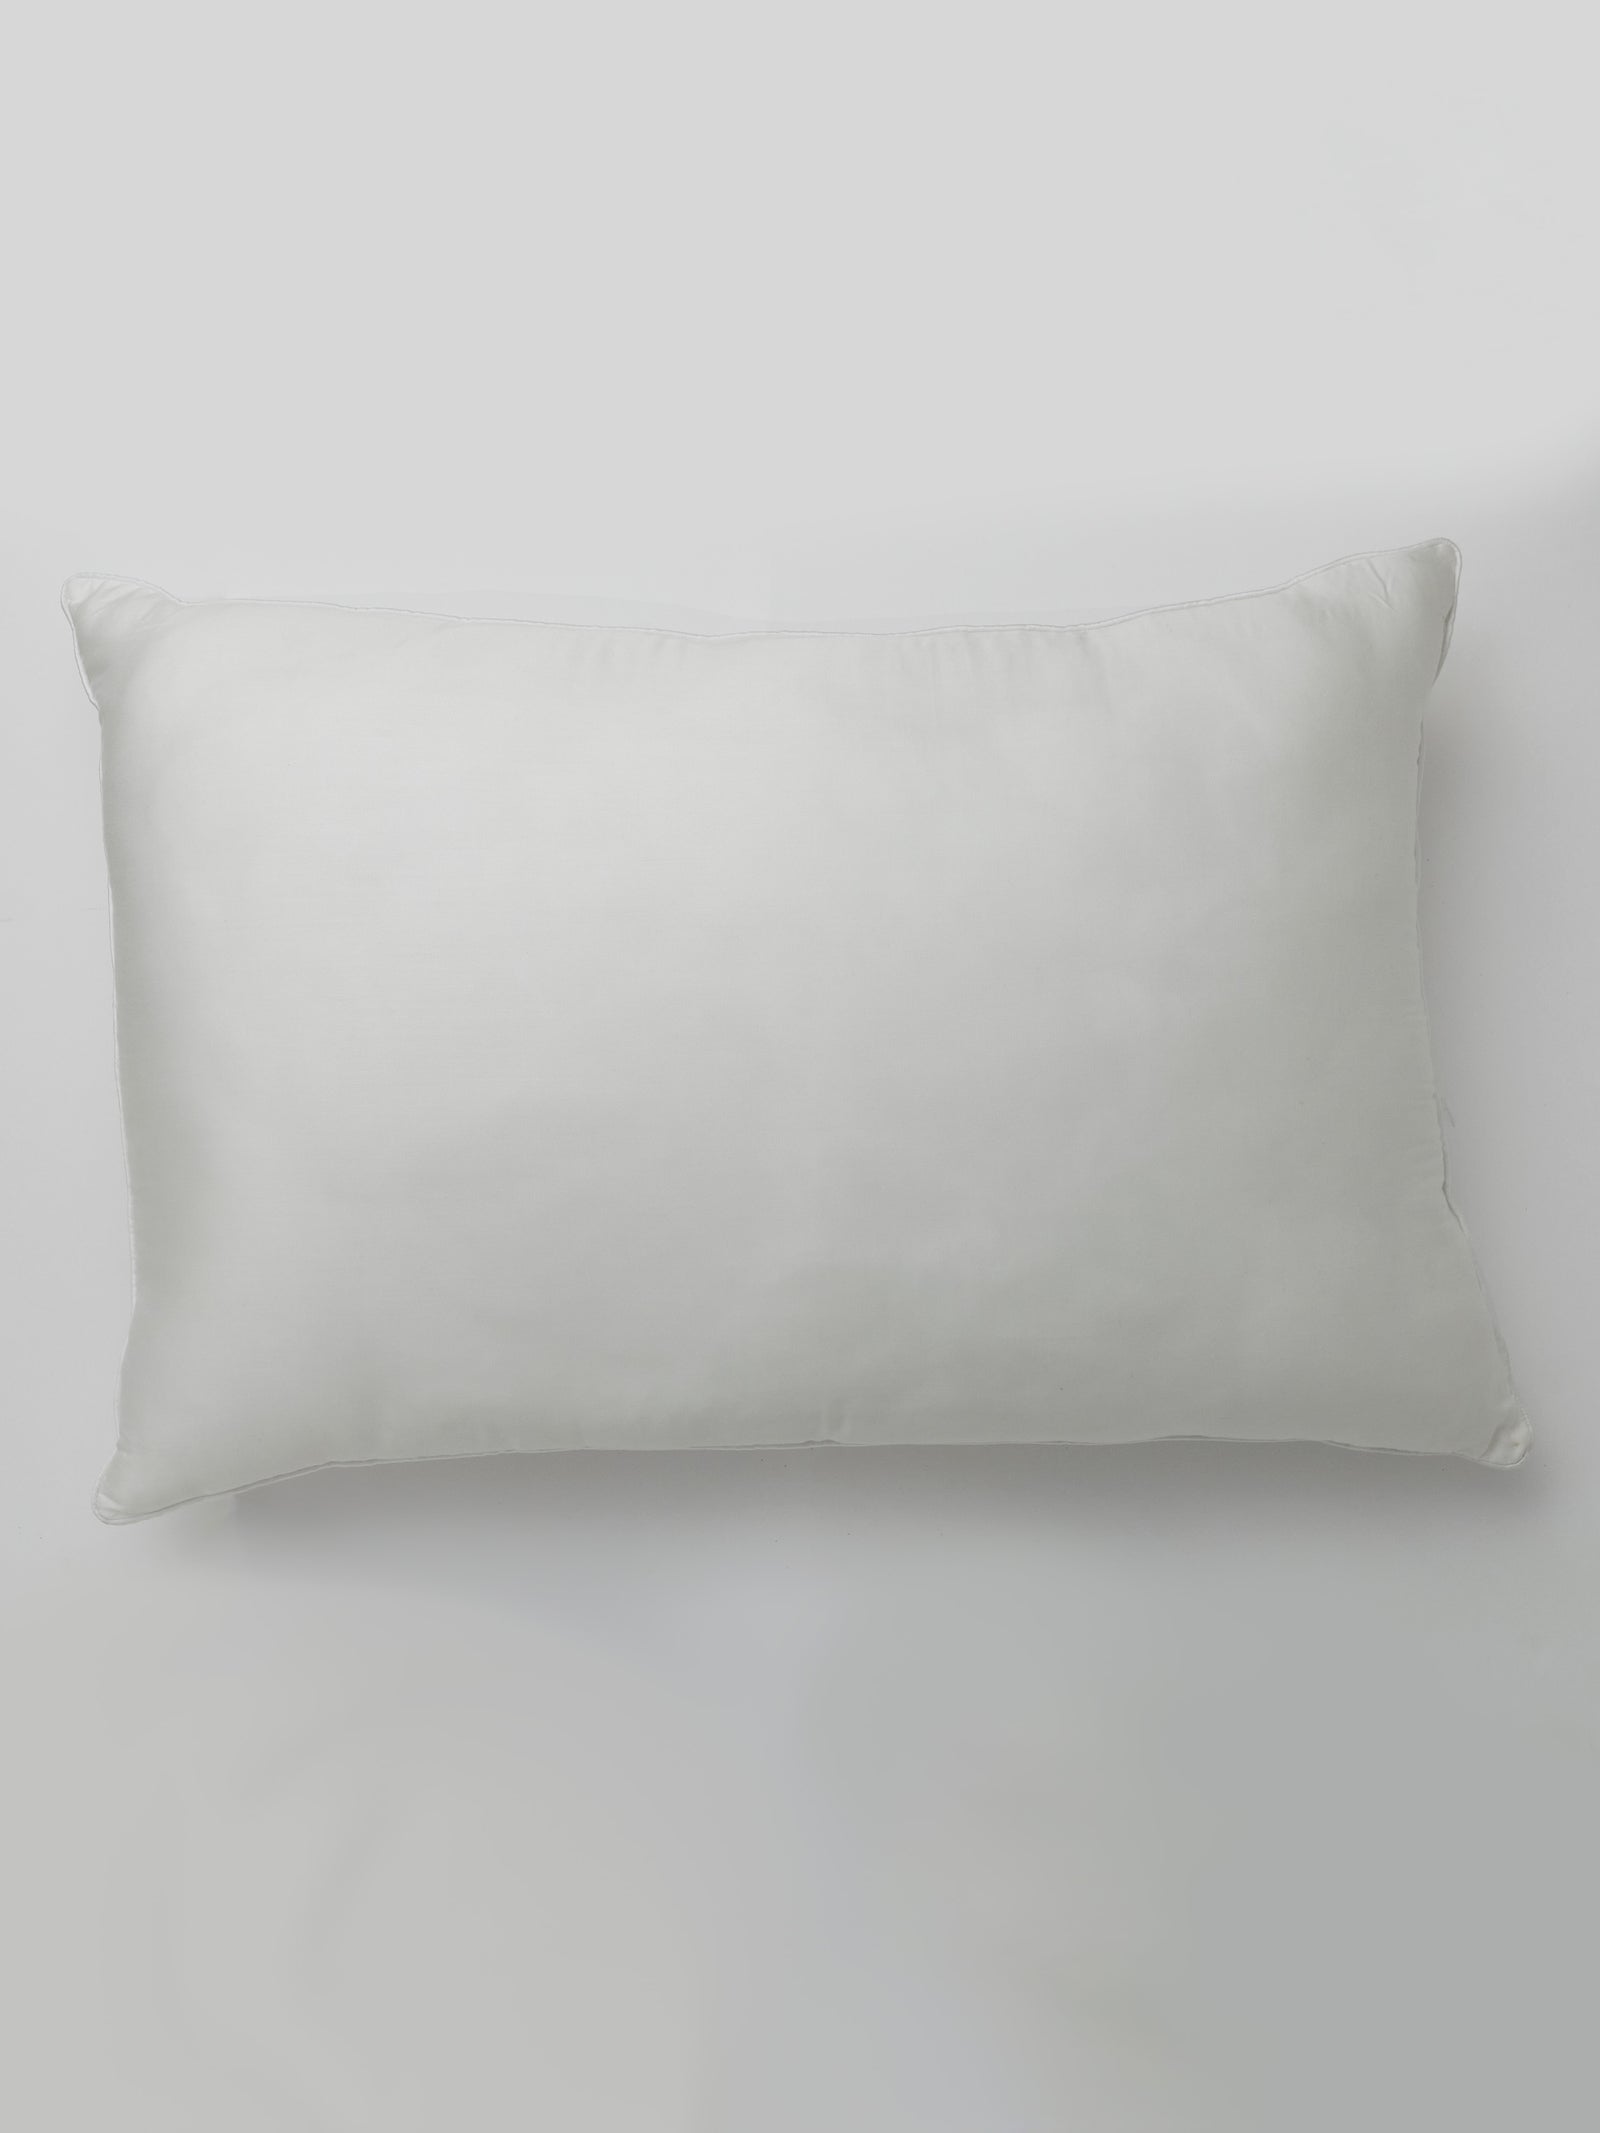 Travel pillow with white background 